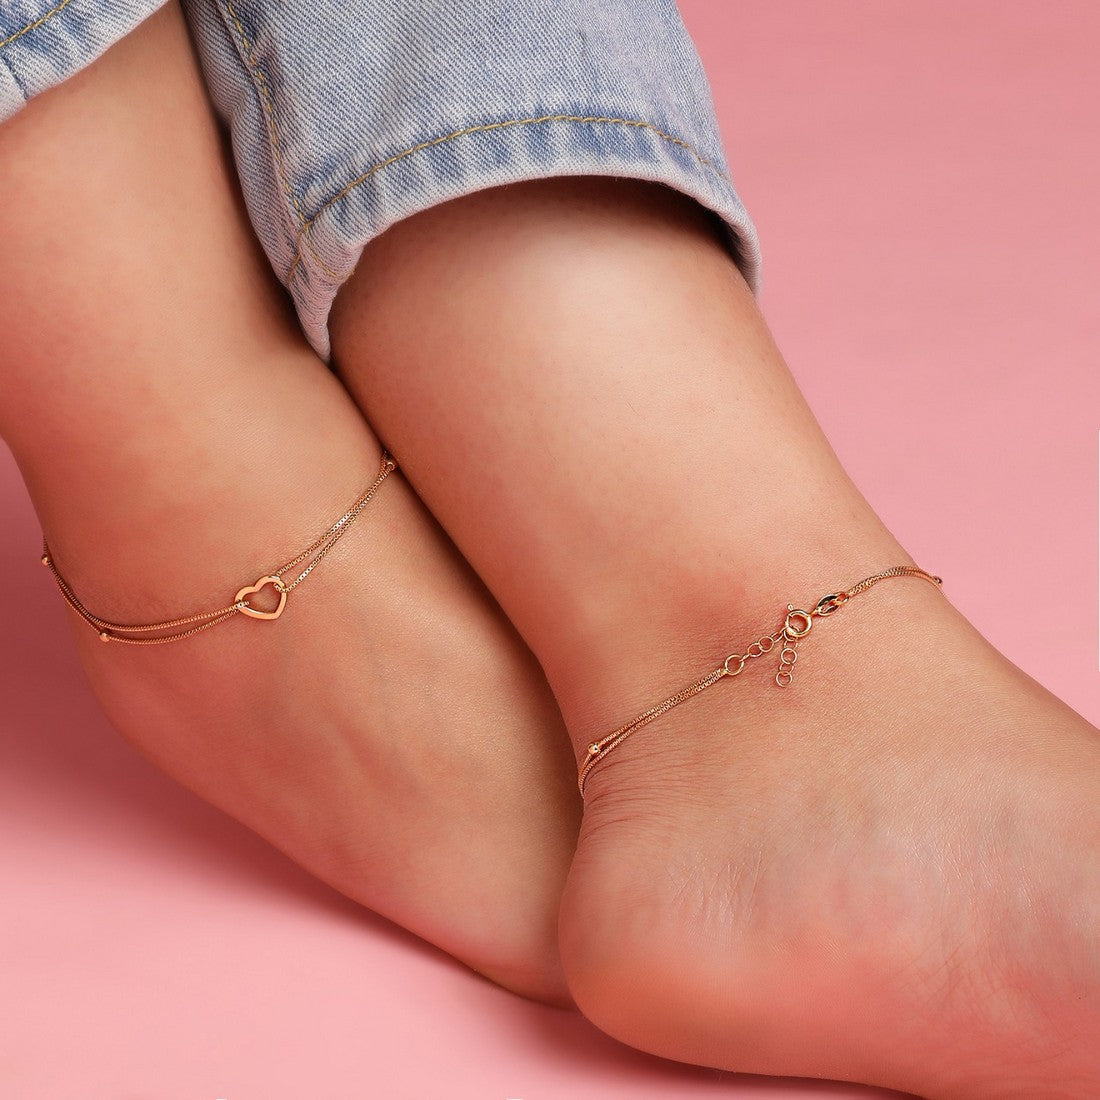 Whispers of Love: Dainty Heart 925 Silver Anklets Gift Hamper